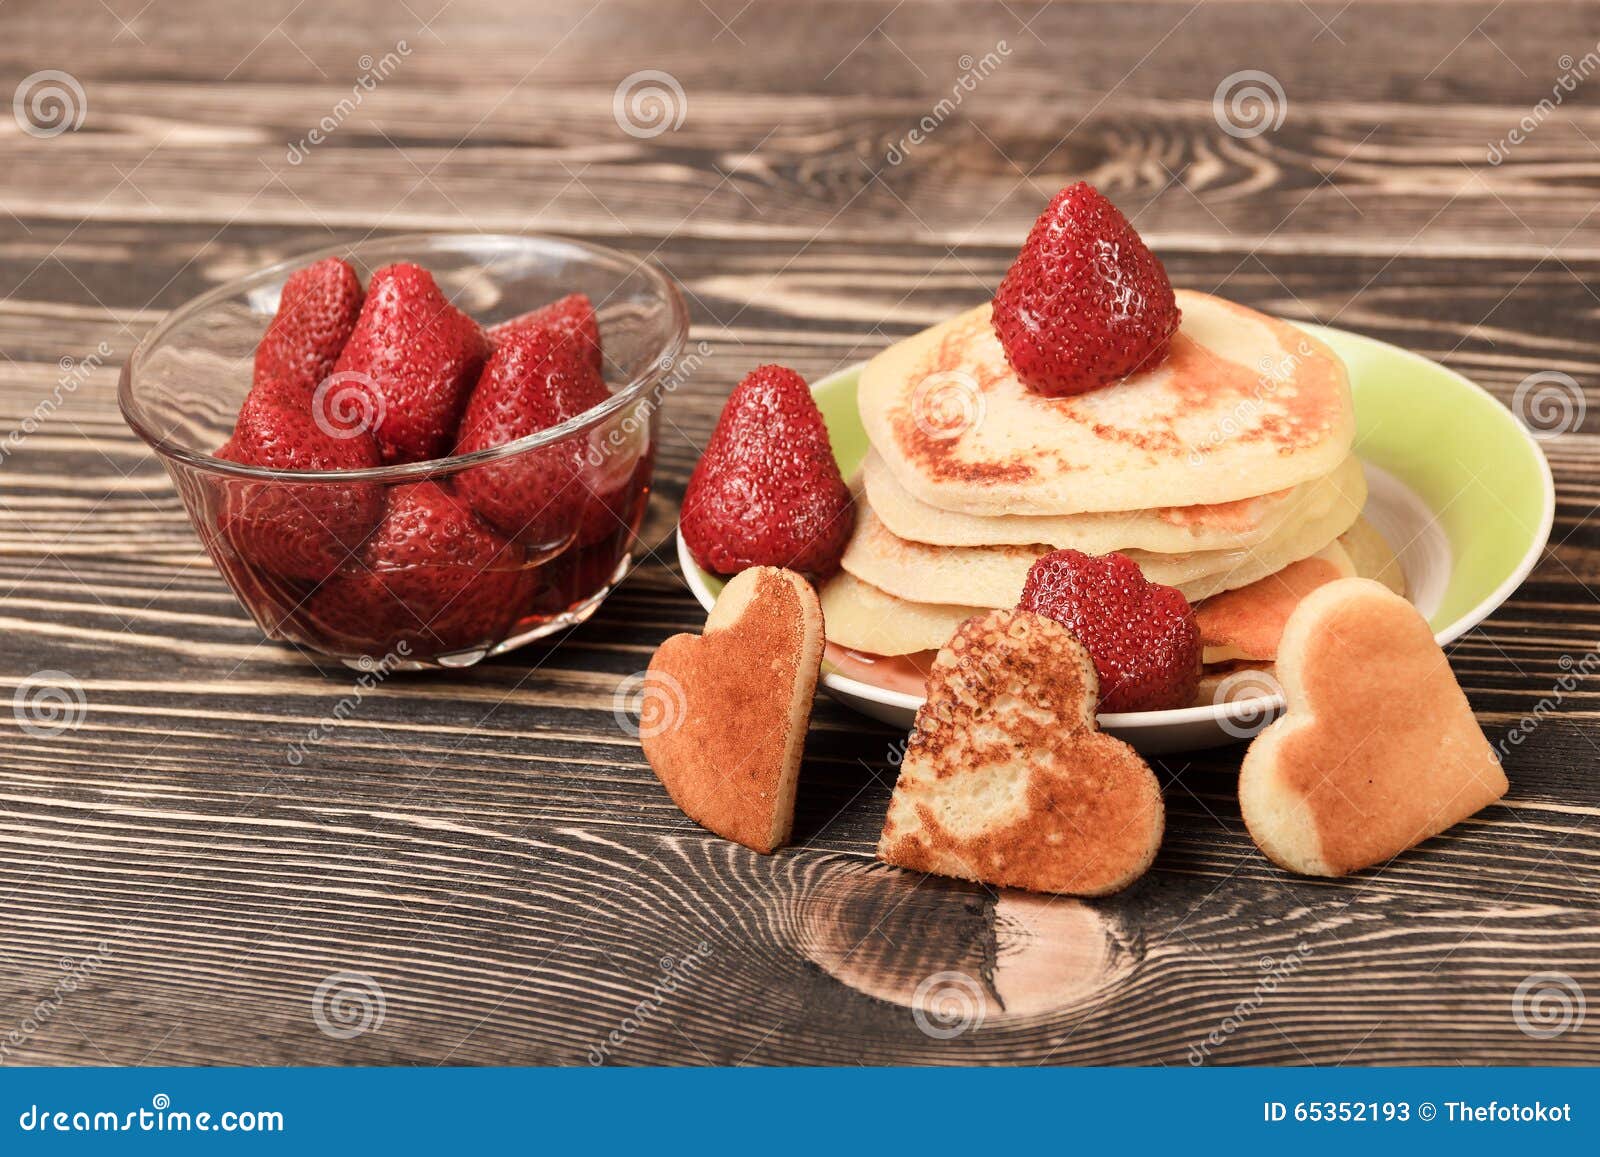 Heart-shaped Pancakes with Strawberry Stock Image - Image of liquid ...